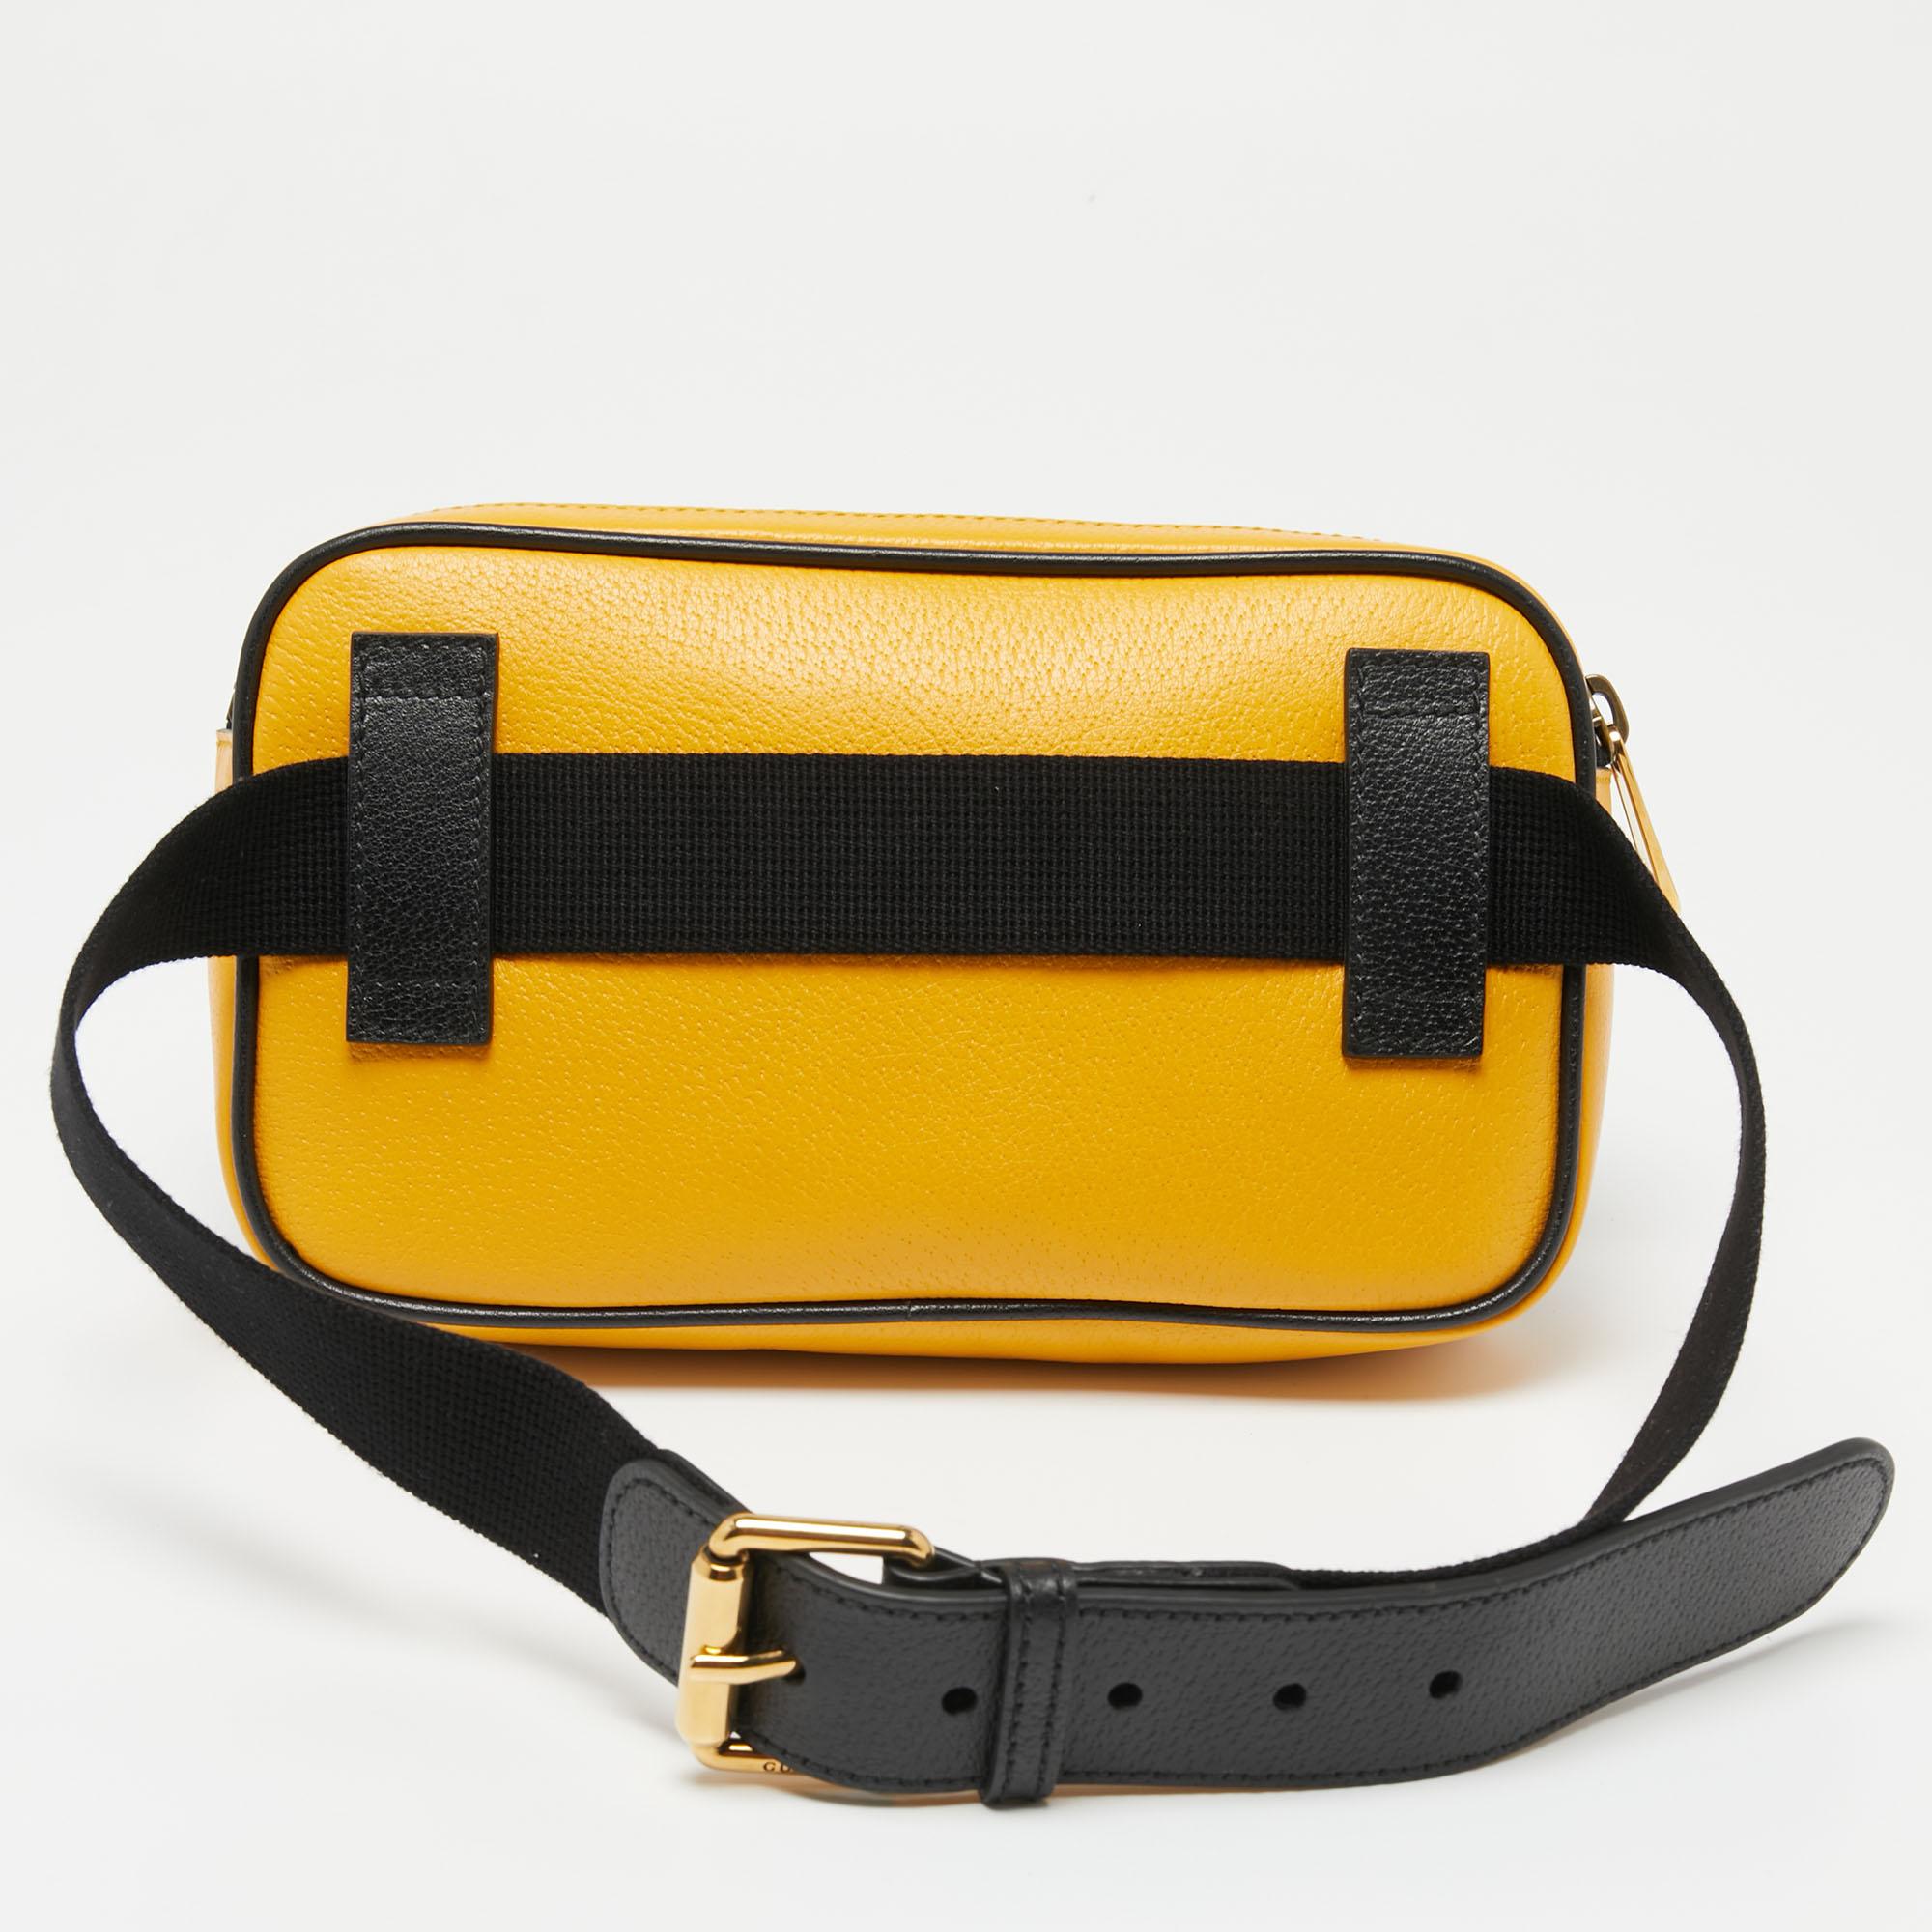 This multicolored belt bag from Gucci is a highly coveted piece among fashion lovers. This one here in leather is equipped with a zipper fastening that opens to a well-sized interior. An adjustable belt is provided for you to wear around your